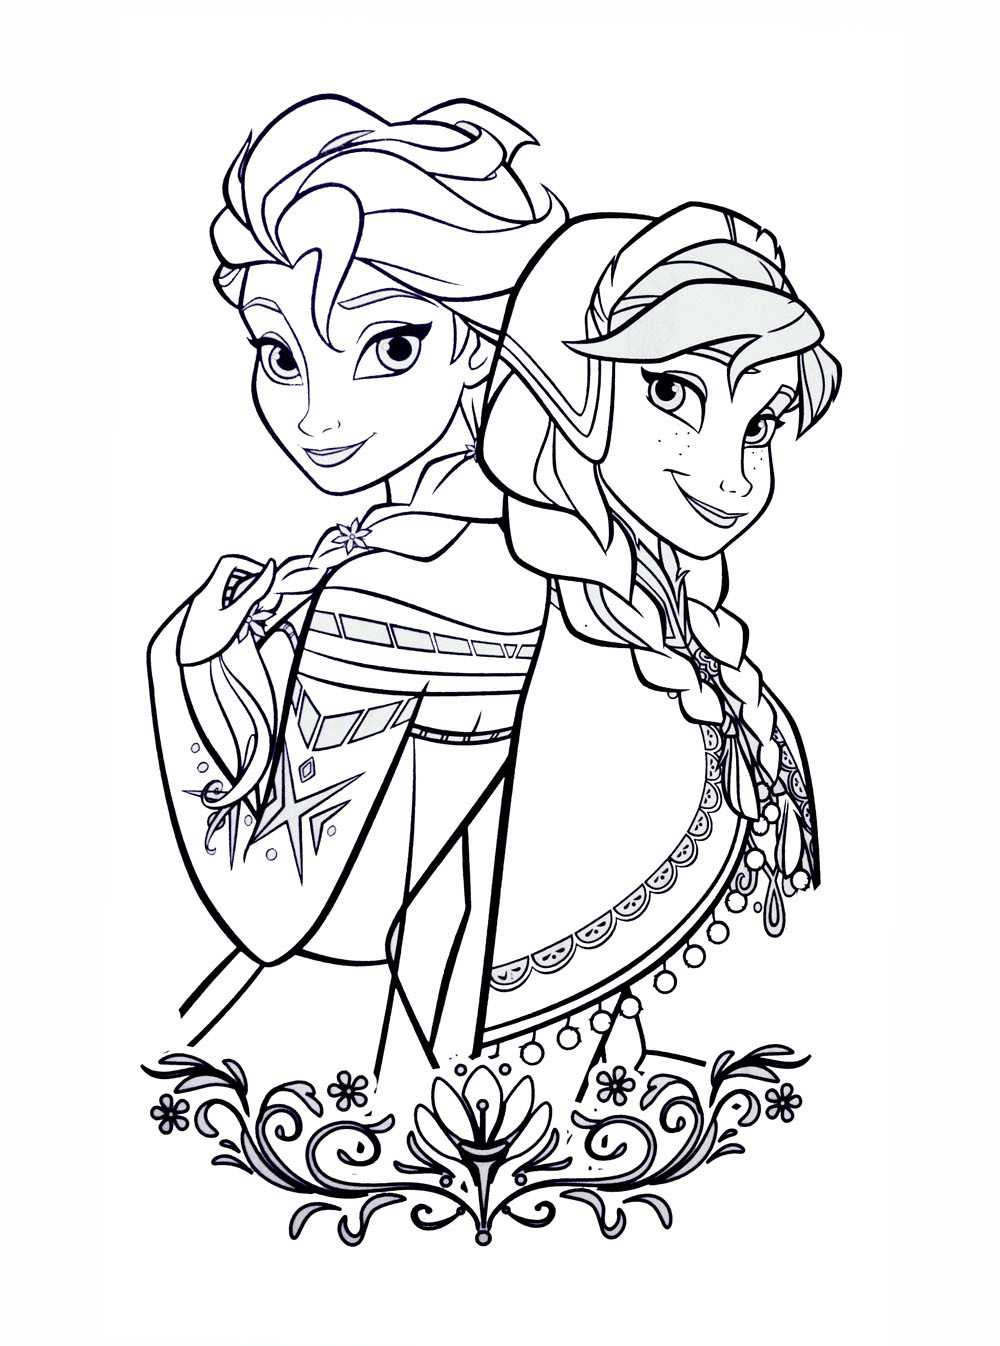 Coloring Pages For Kids Frozen
 Frozen free to color for kids Frozen Kids Coloring Pages